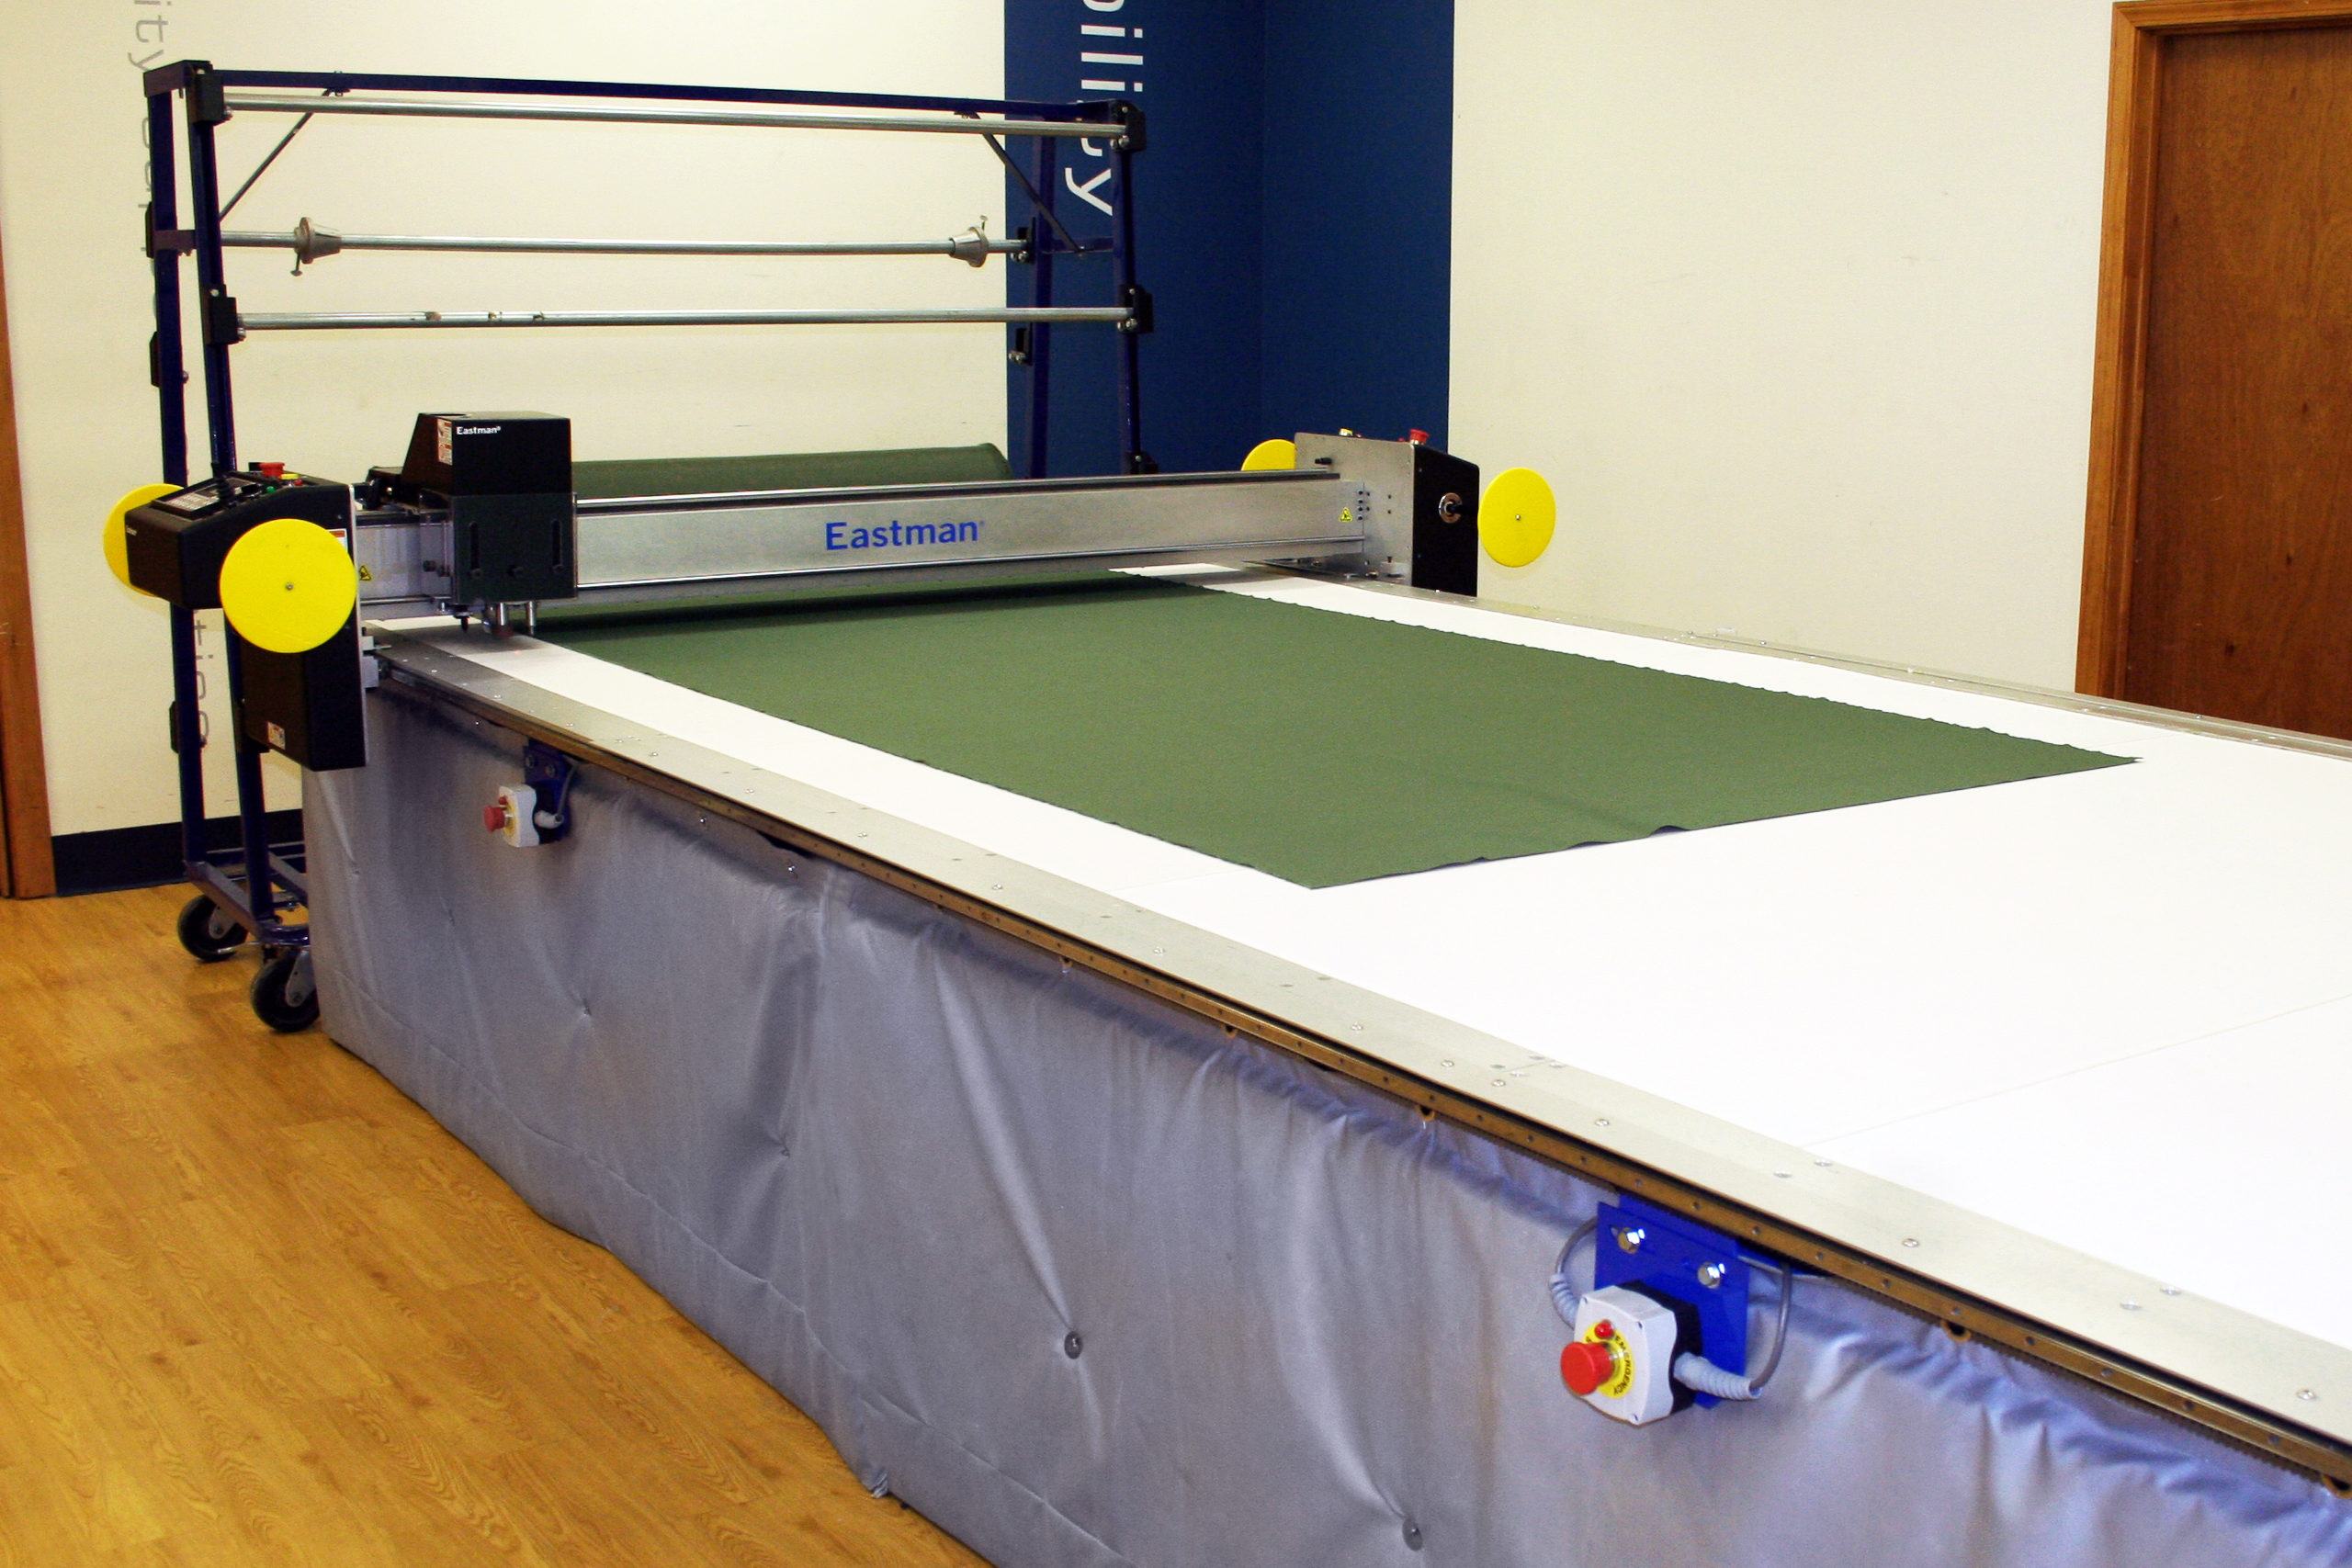 cutting table outfitted with EasiWrap